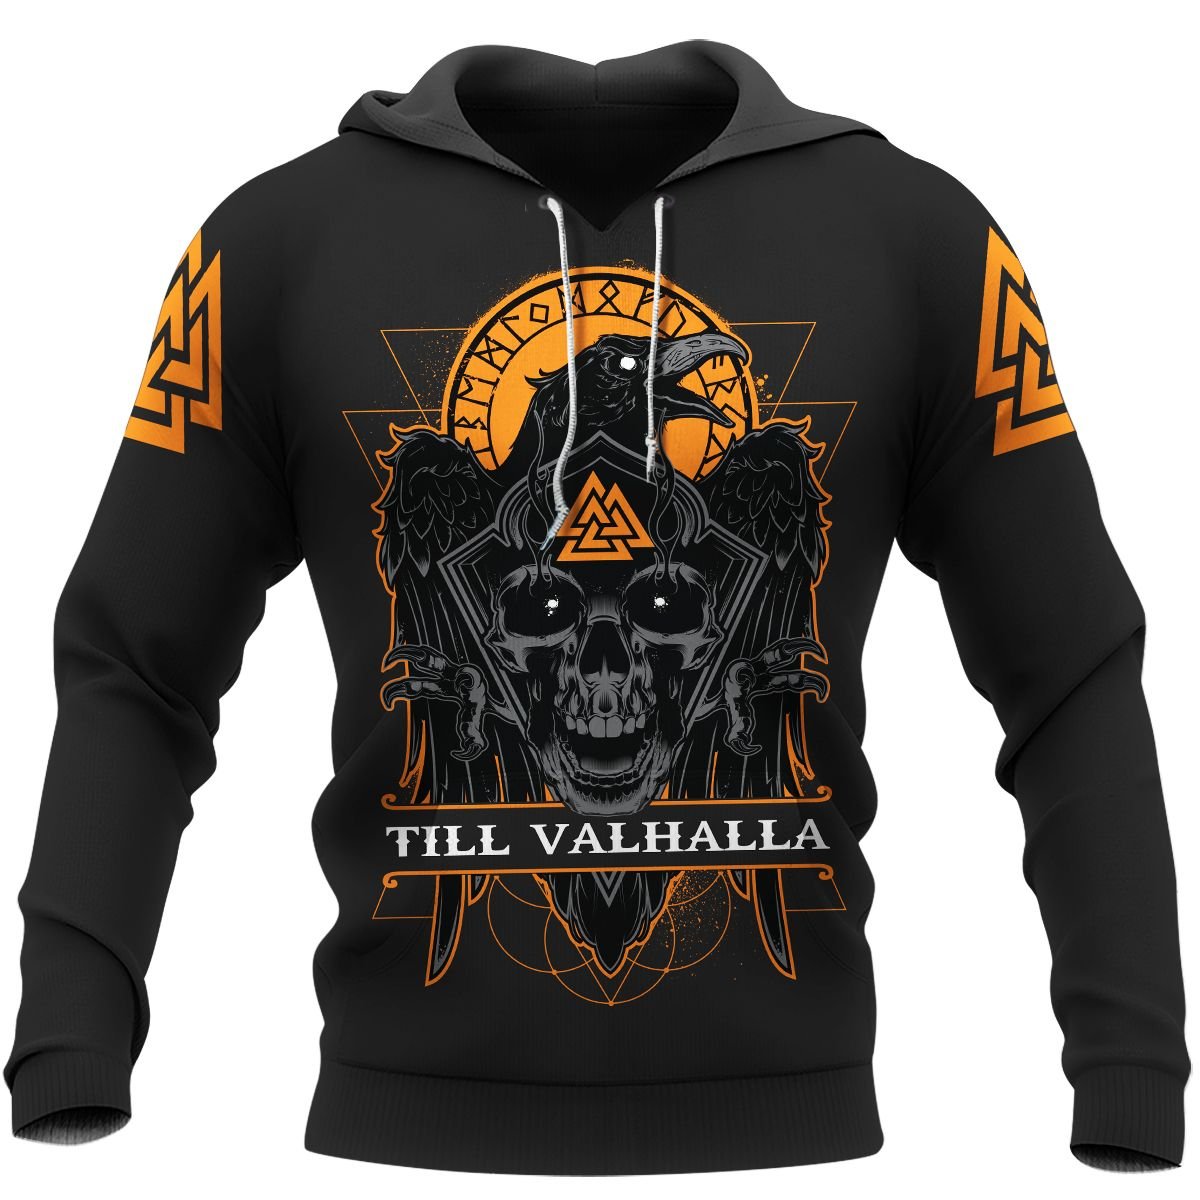 Till Valhalla Raven Viking Hoodie and T-shirt